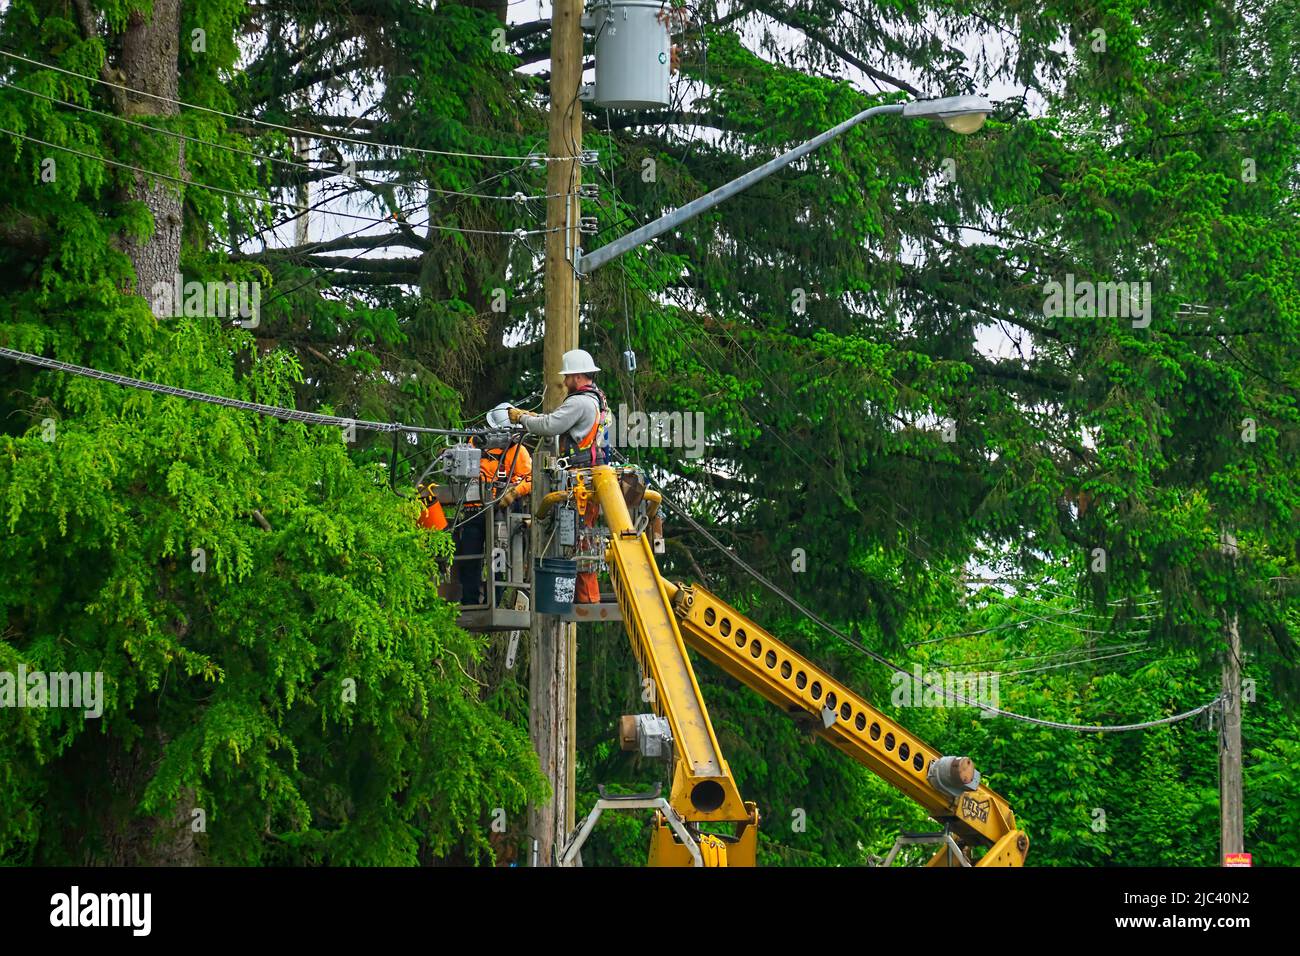 Workers repairing a line up a utility pole. Stock Photo